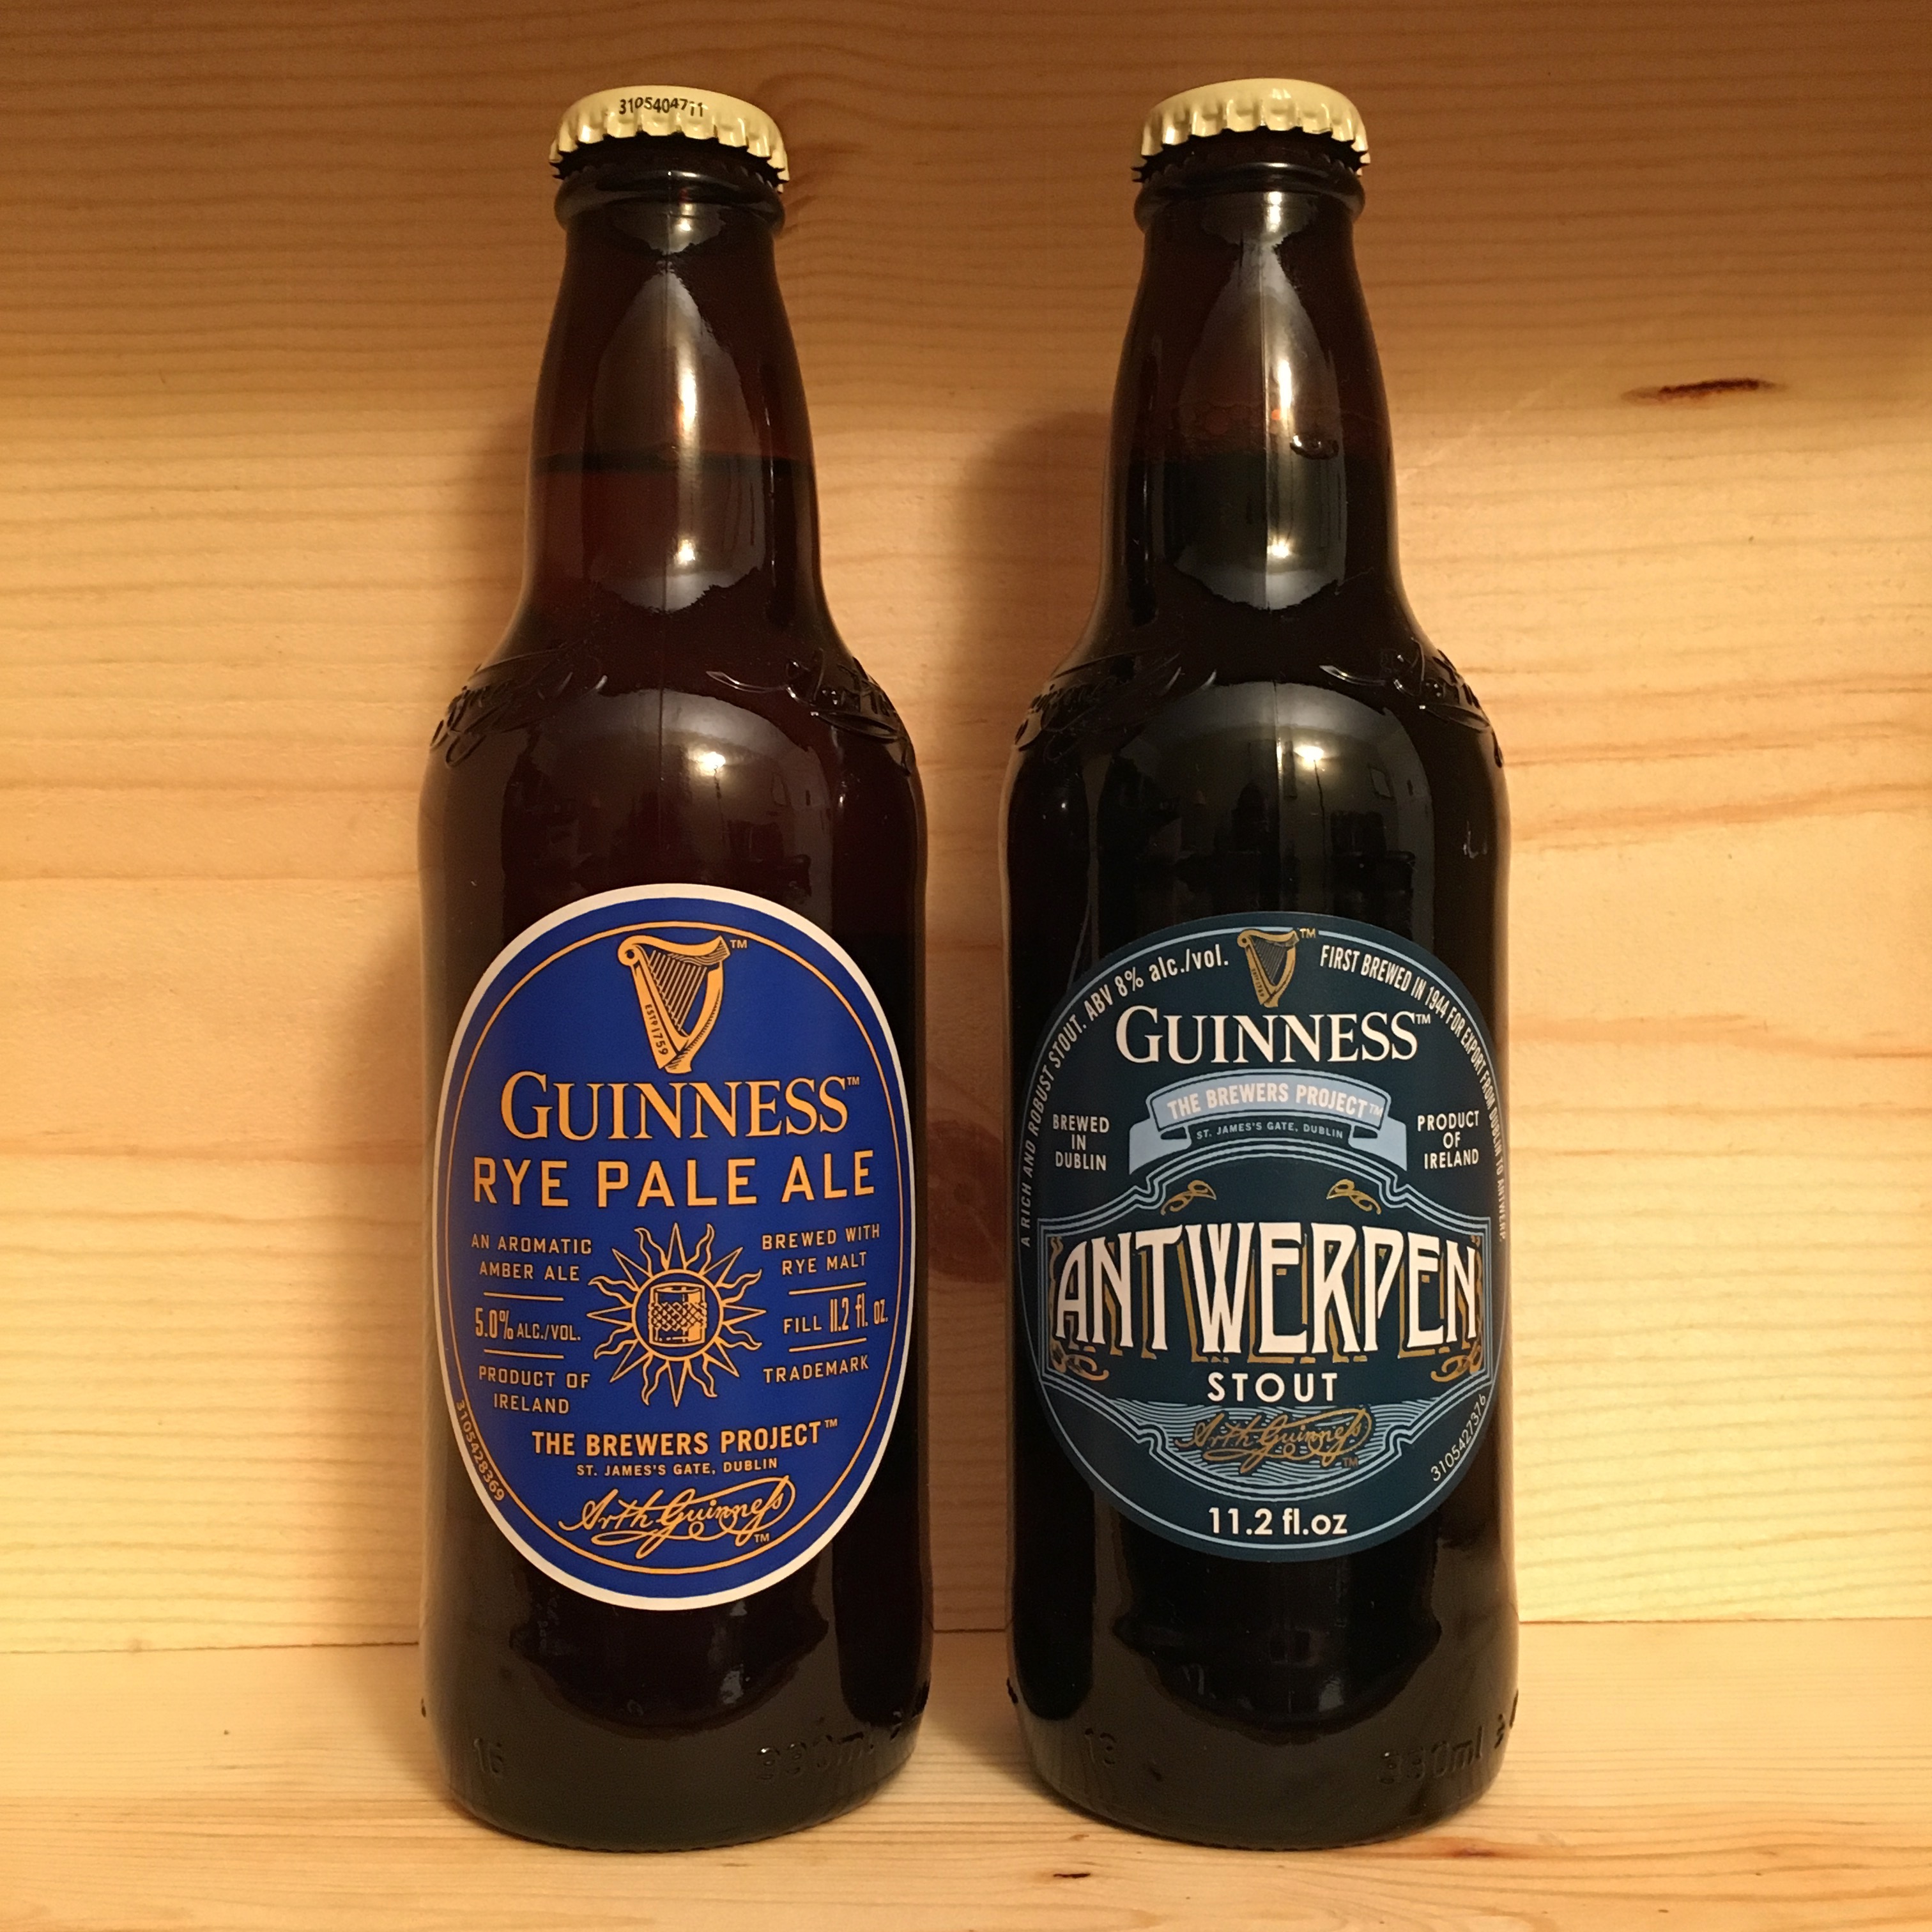 Bottles of two new beers from Guinness St. James Gate, Guinness Rye Pale Ale and Guinness Antwerpen Stout.